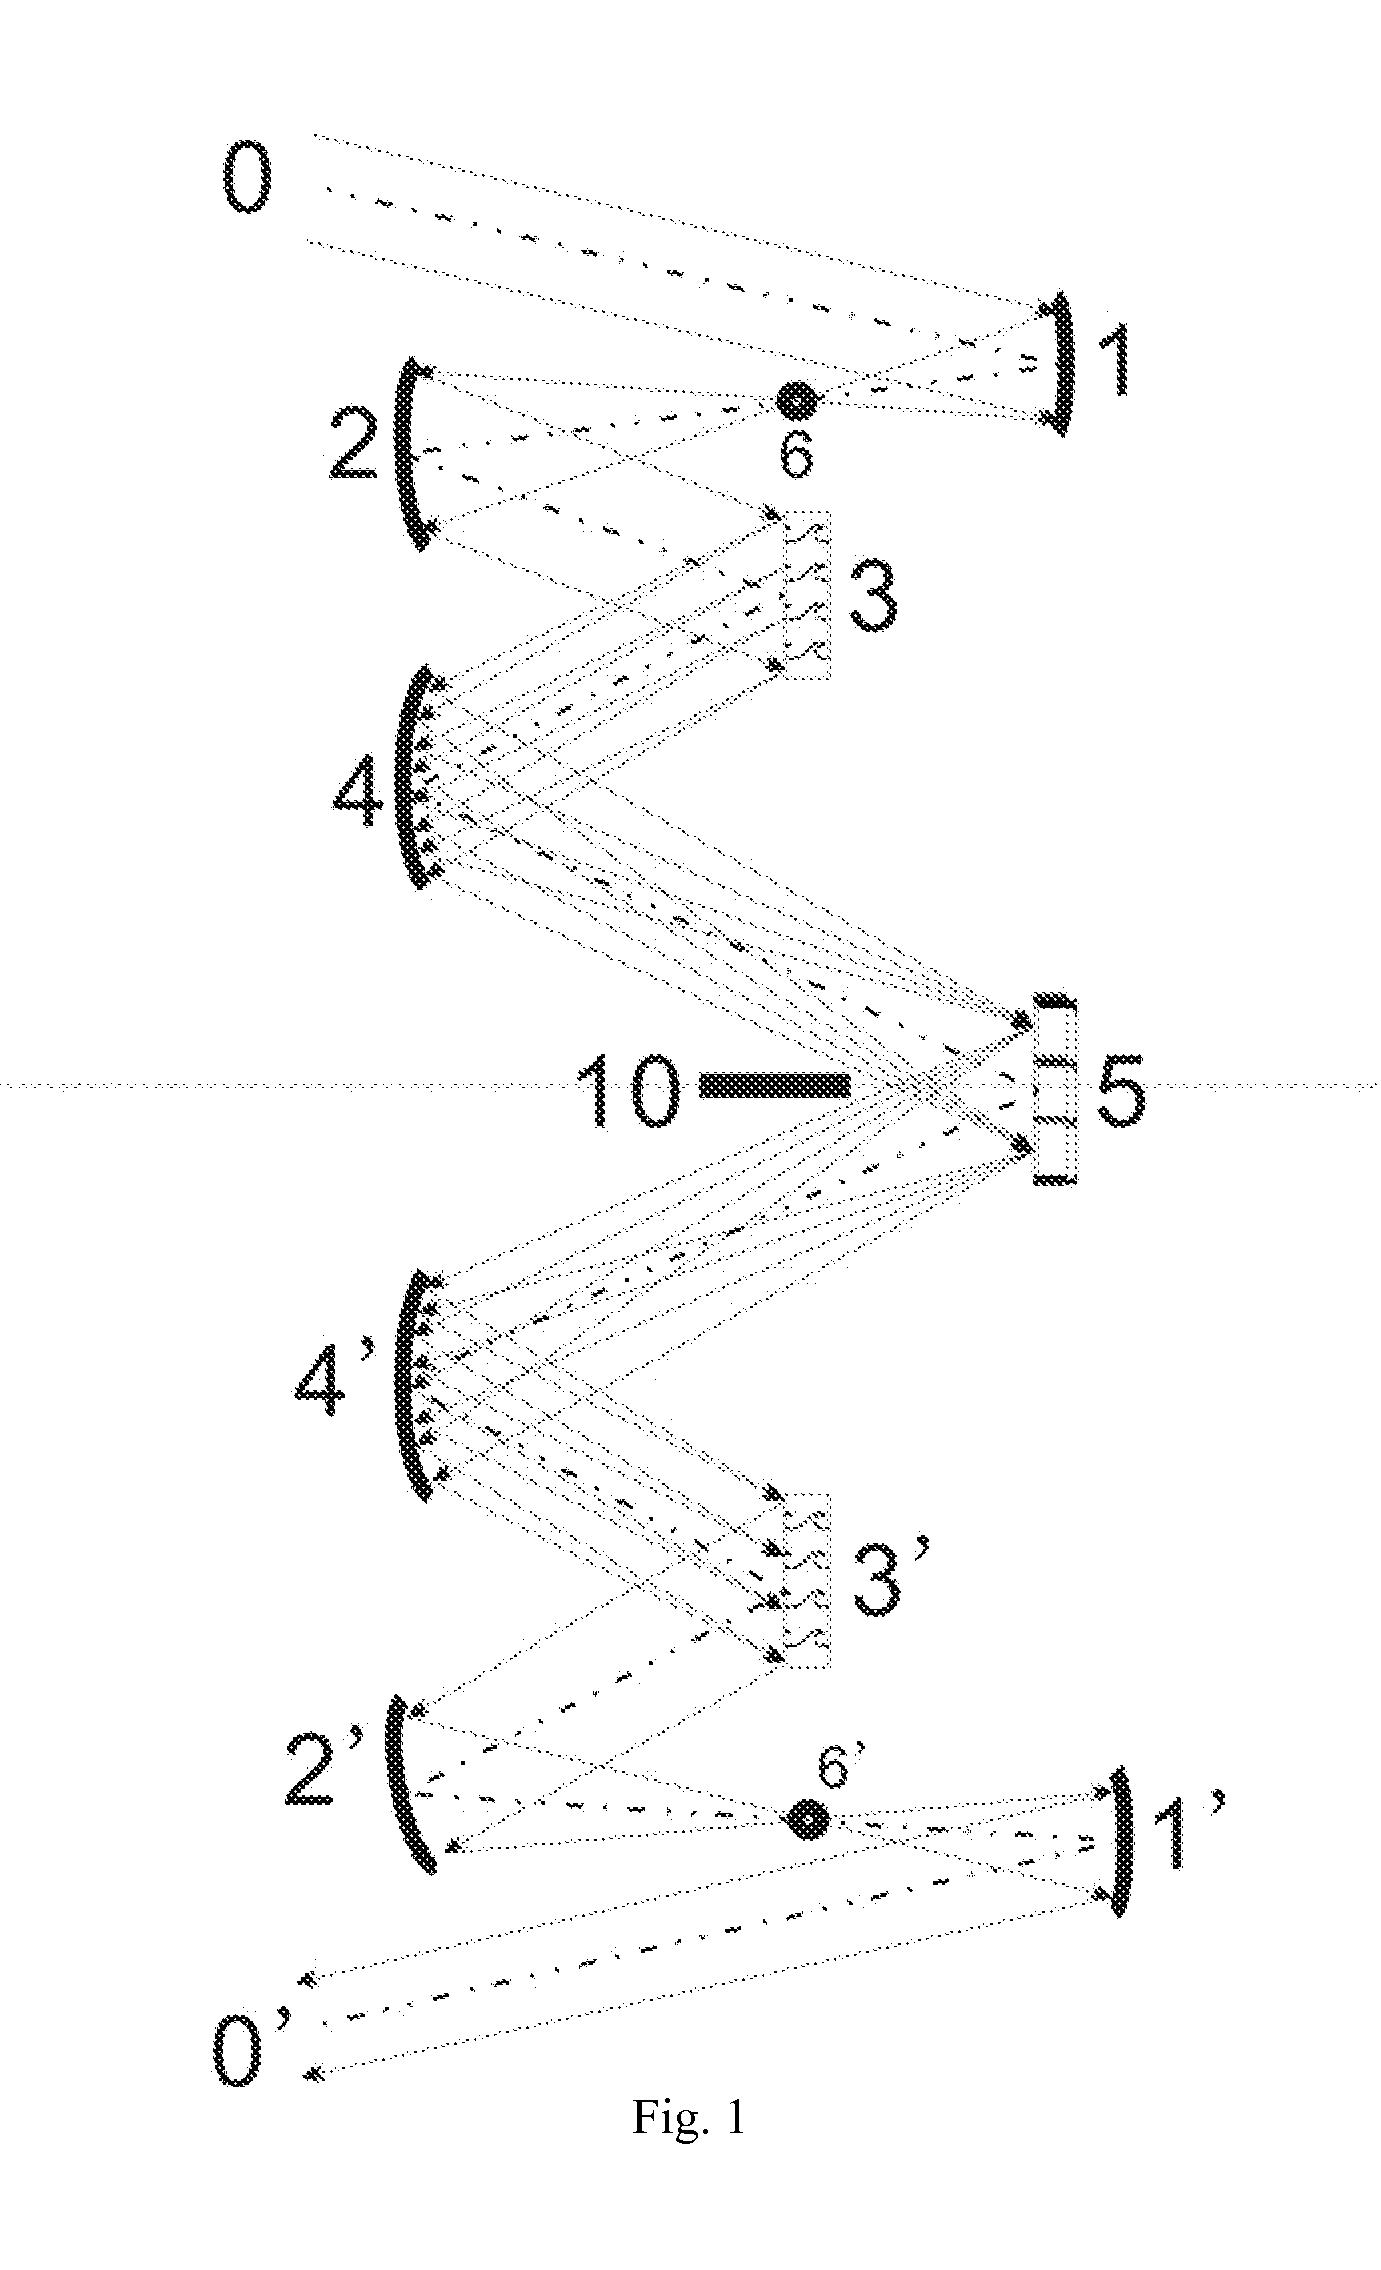 Spectra shaping device for chirped pulse amplification